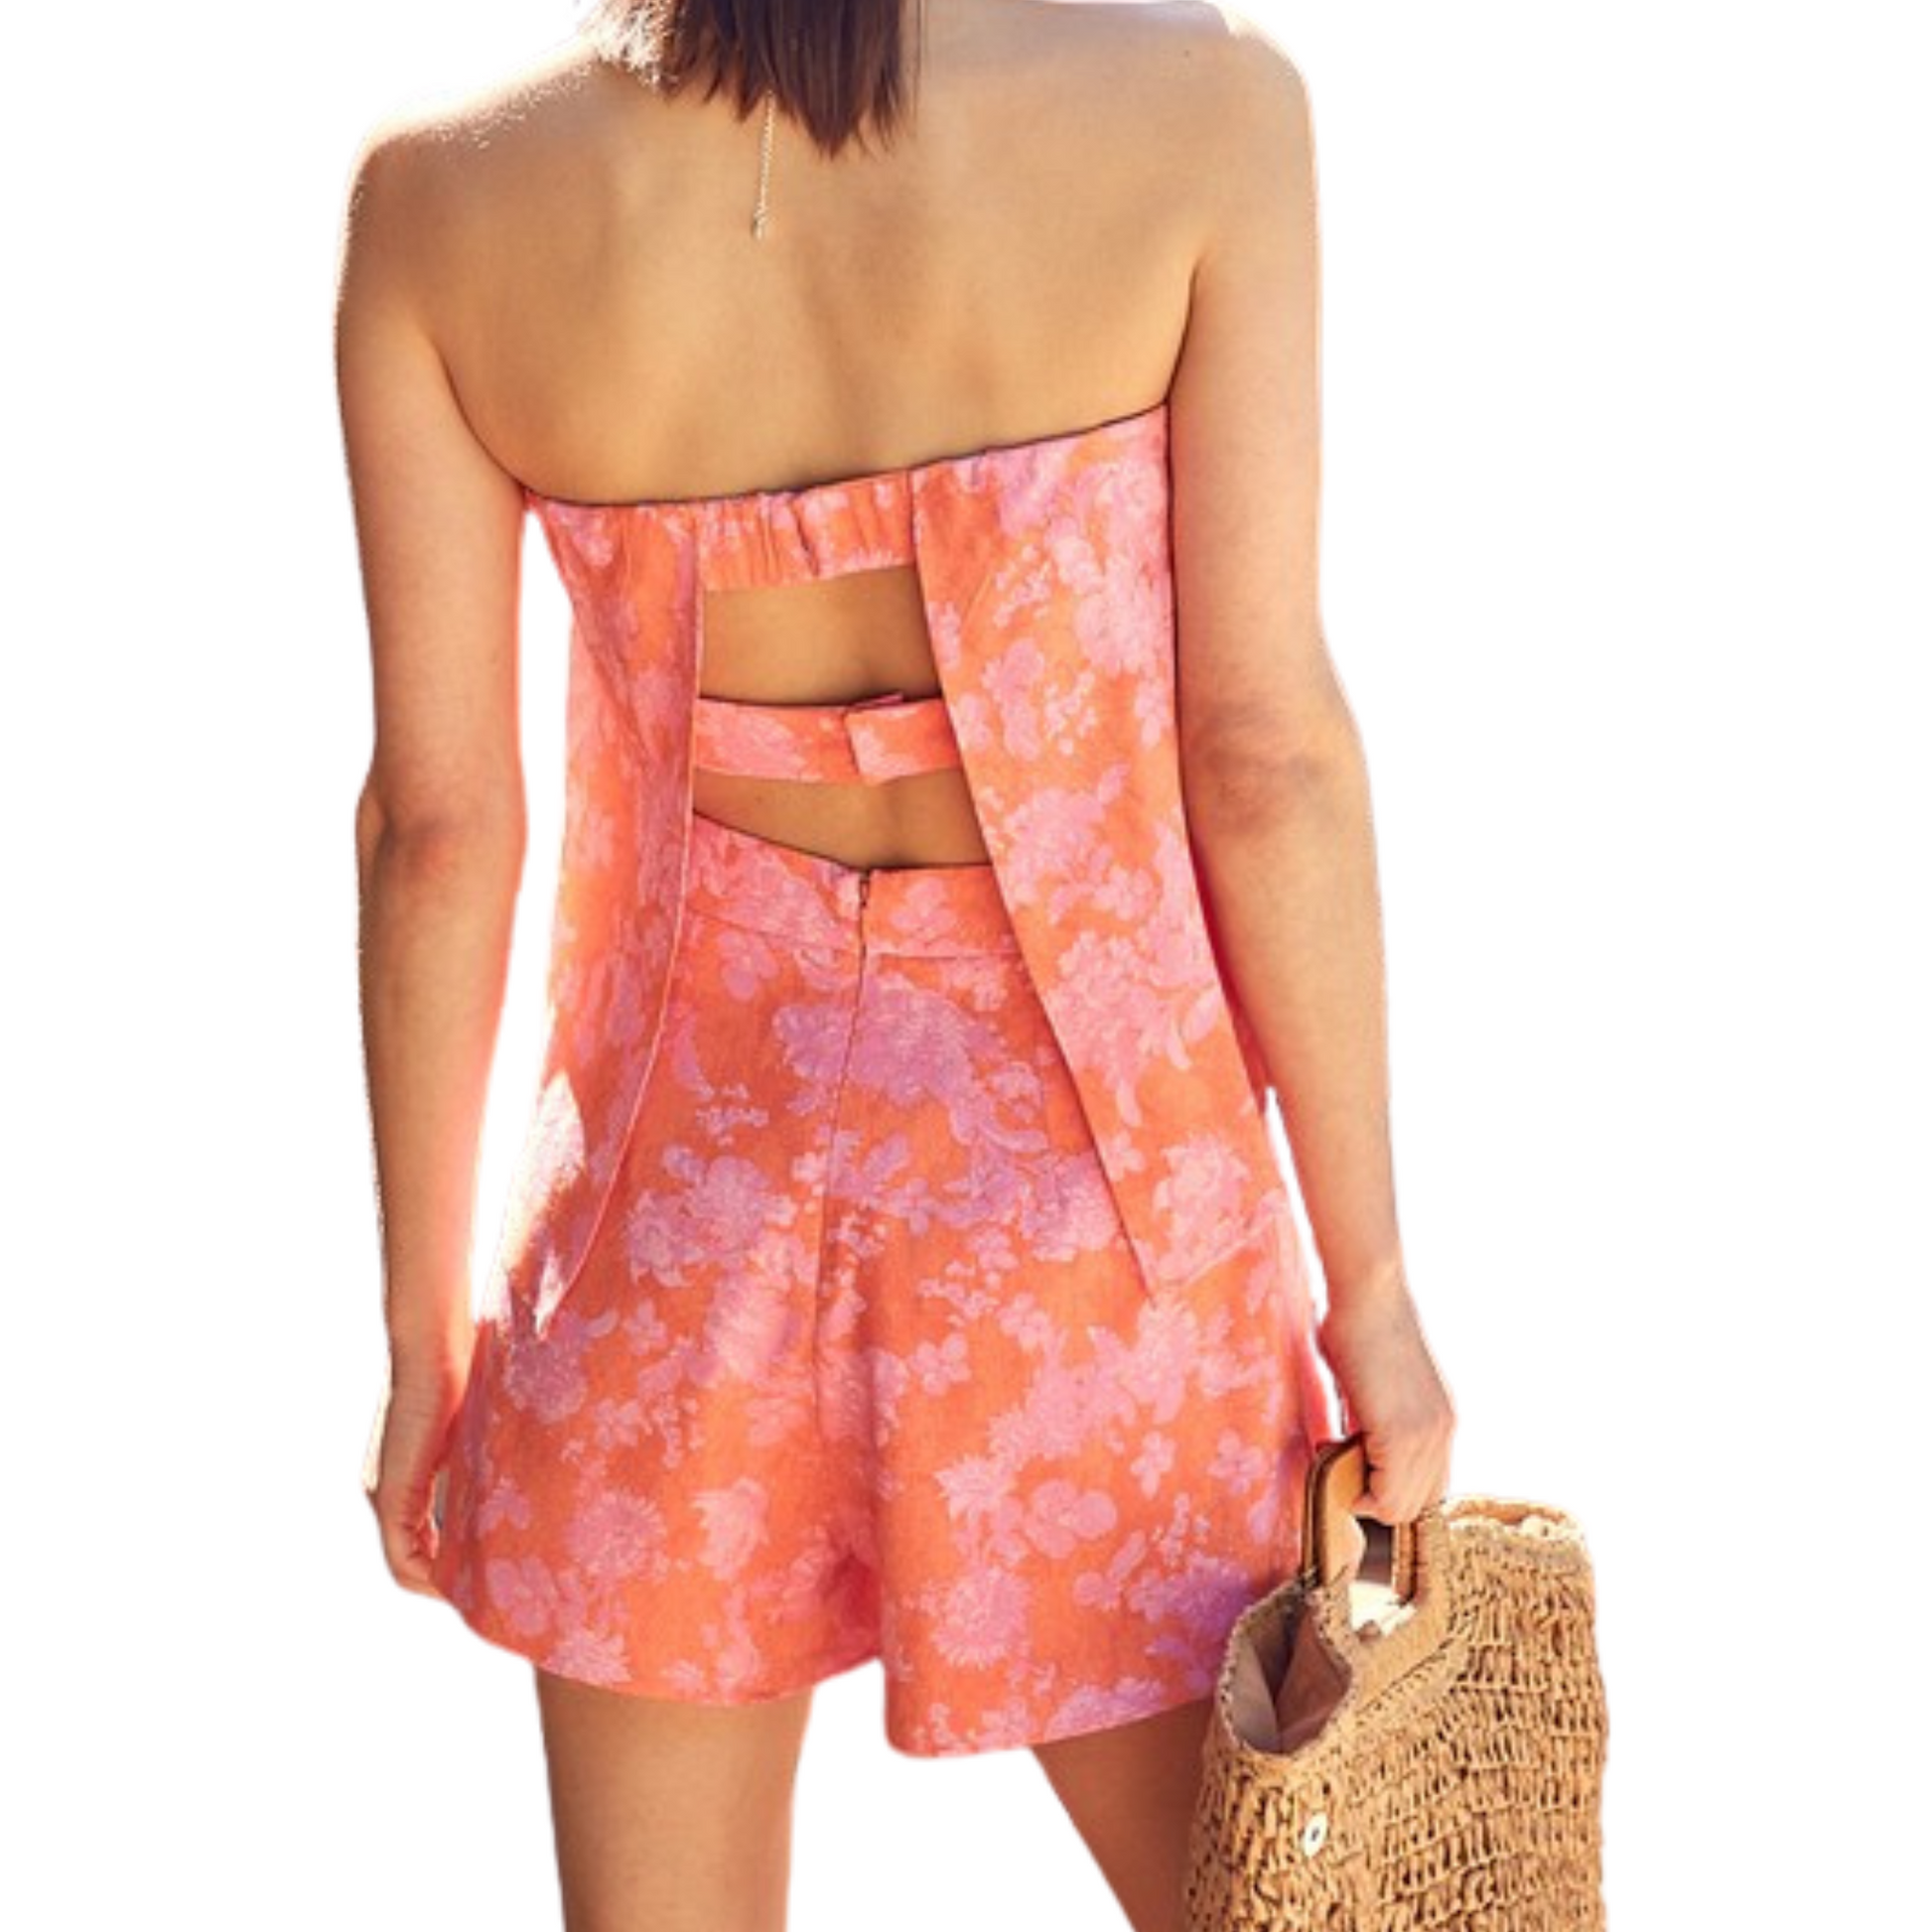 Orange and pink floral tube top romper with double-strapped, structured back, worn by a woman from the back.